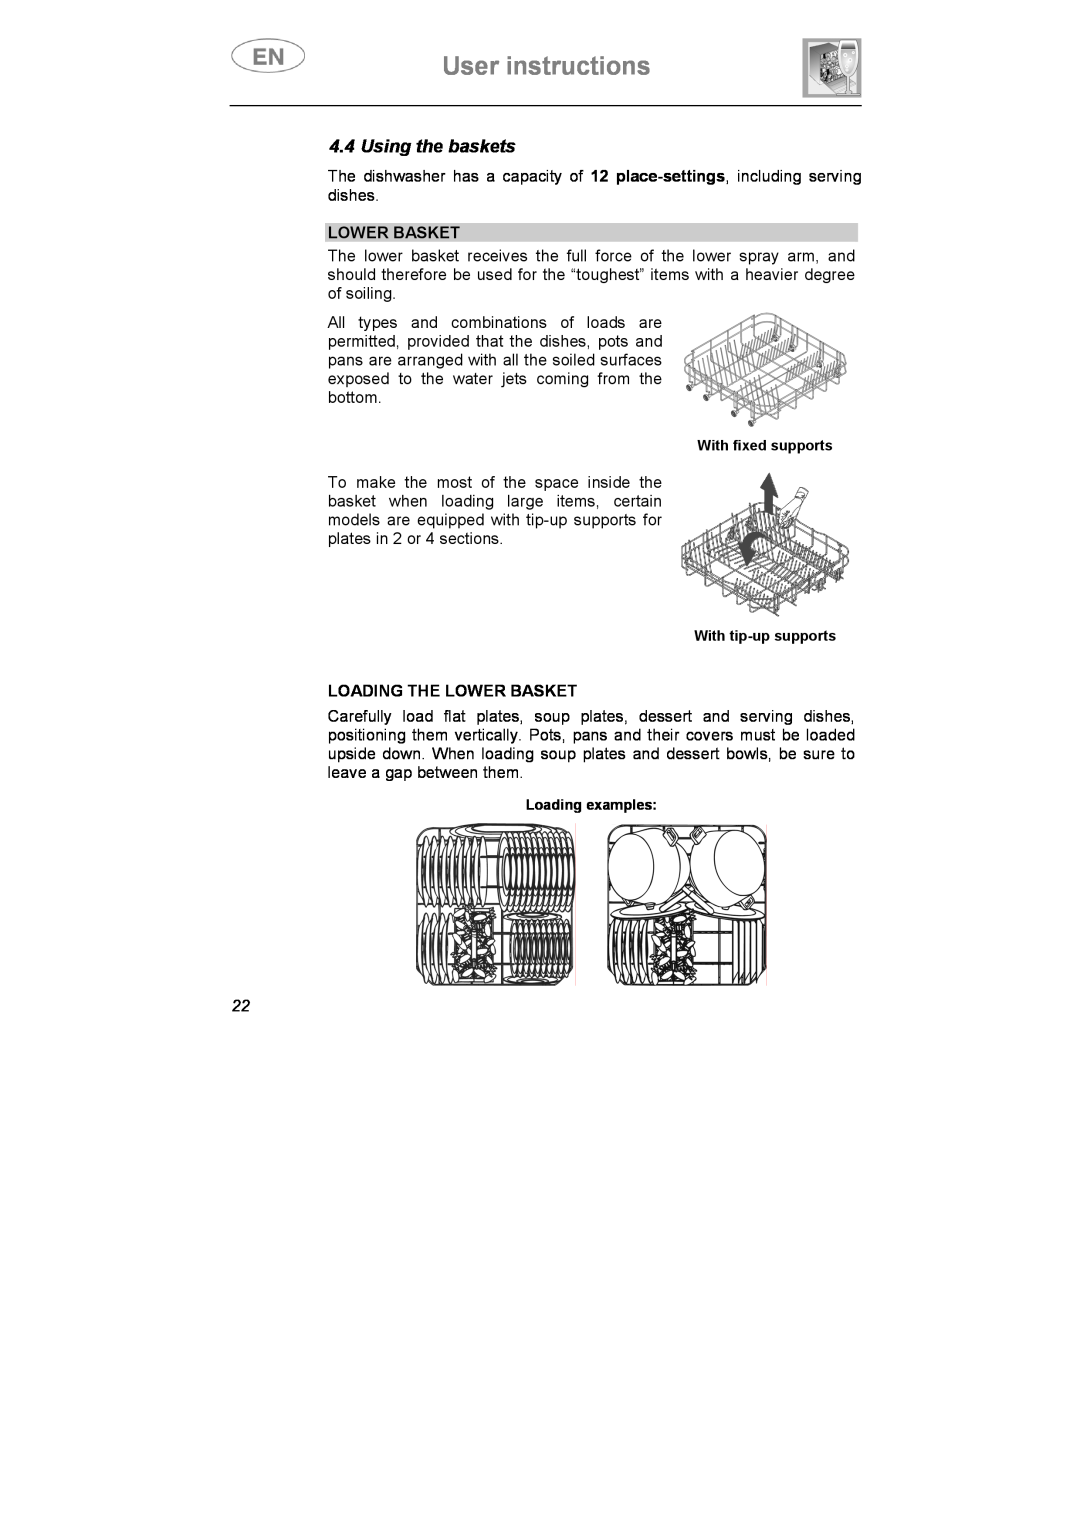 Smeg CA01S, CA01-5, CA01-4 manual User instructions, Using the baskets, Loading The Lower Basket 